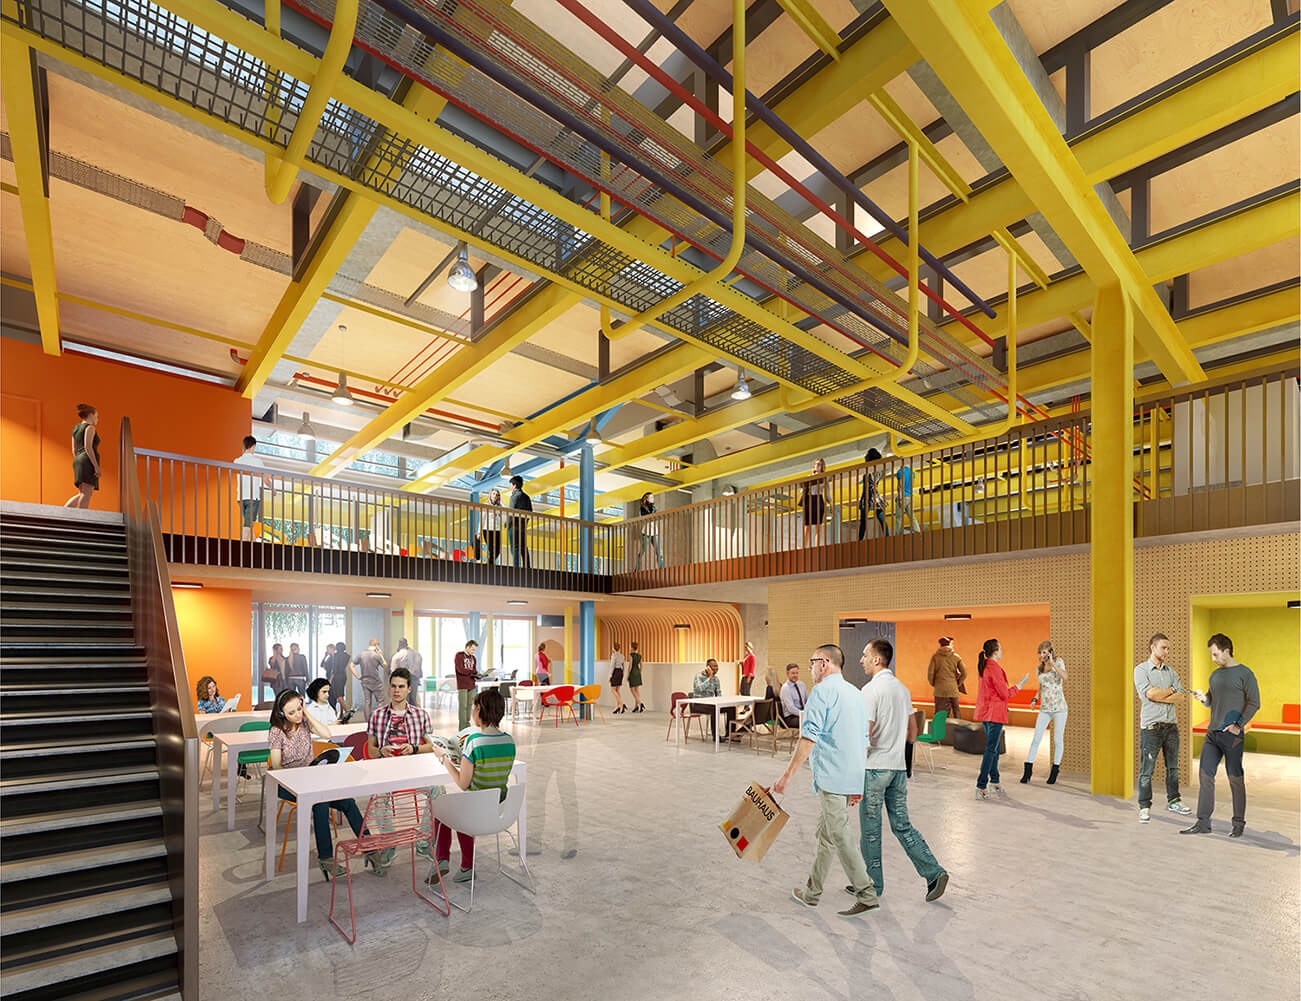 Inside Locksbrook campus - yellow painted industrial building